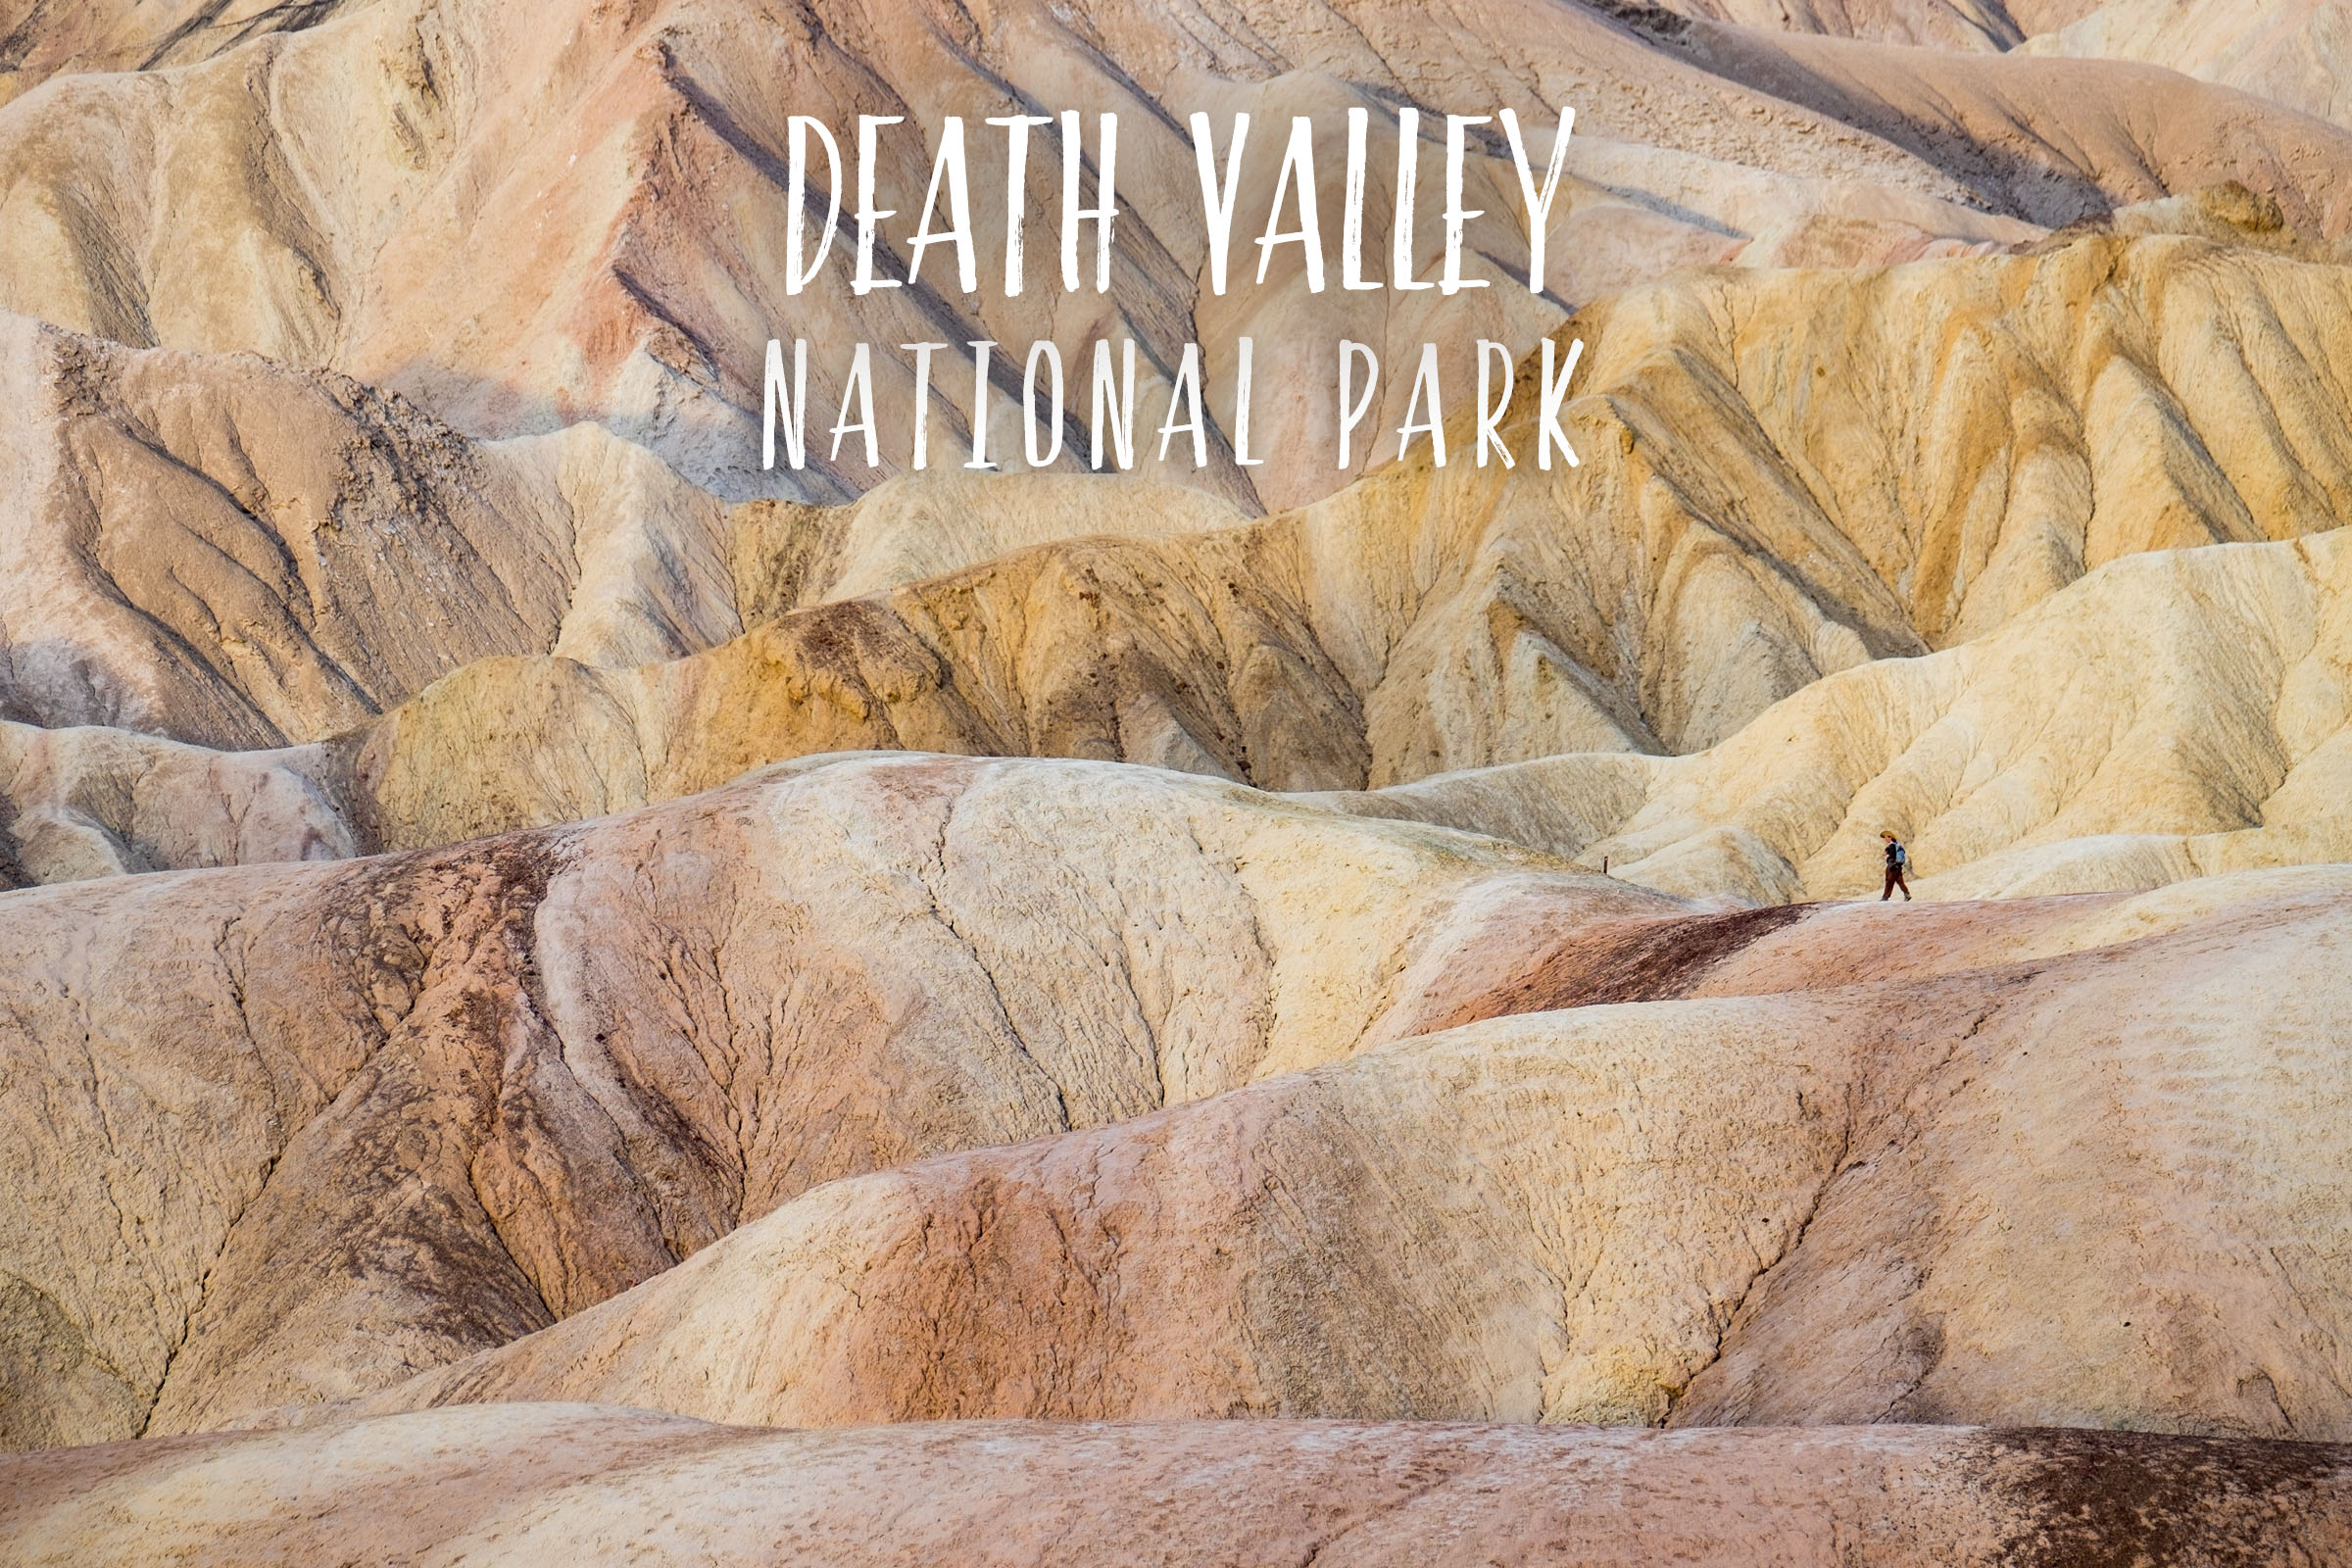 59in52_np--home-page_death-valley.jpg